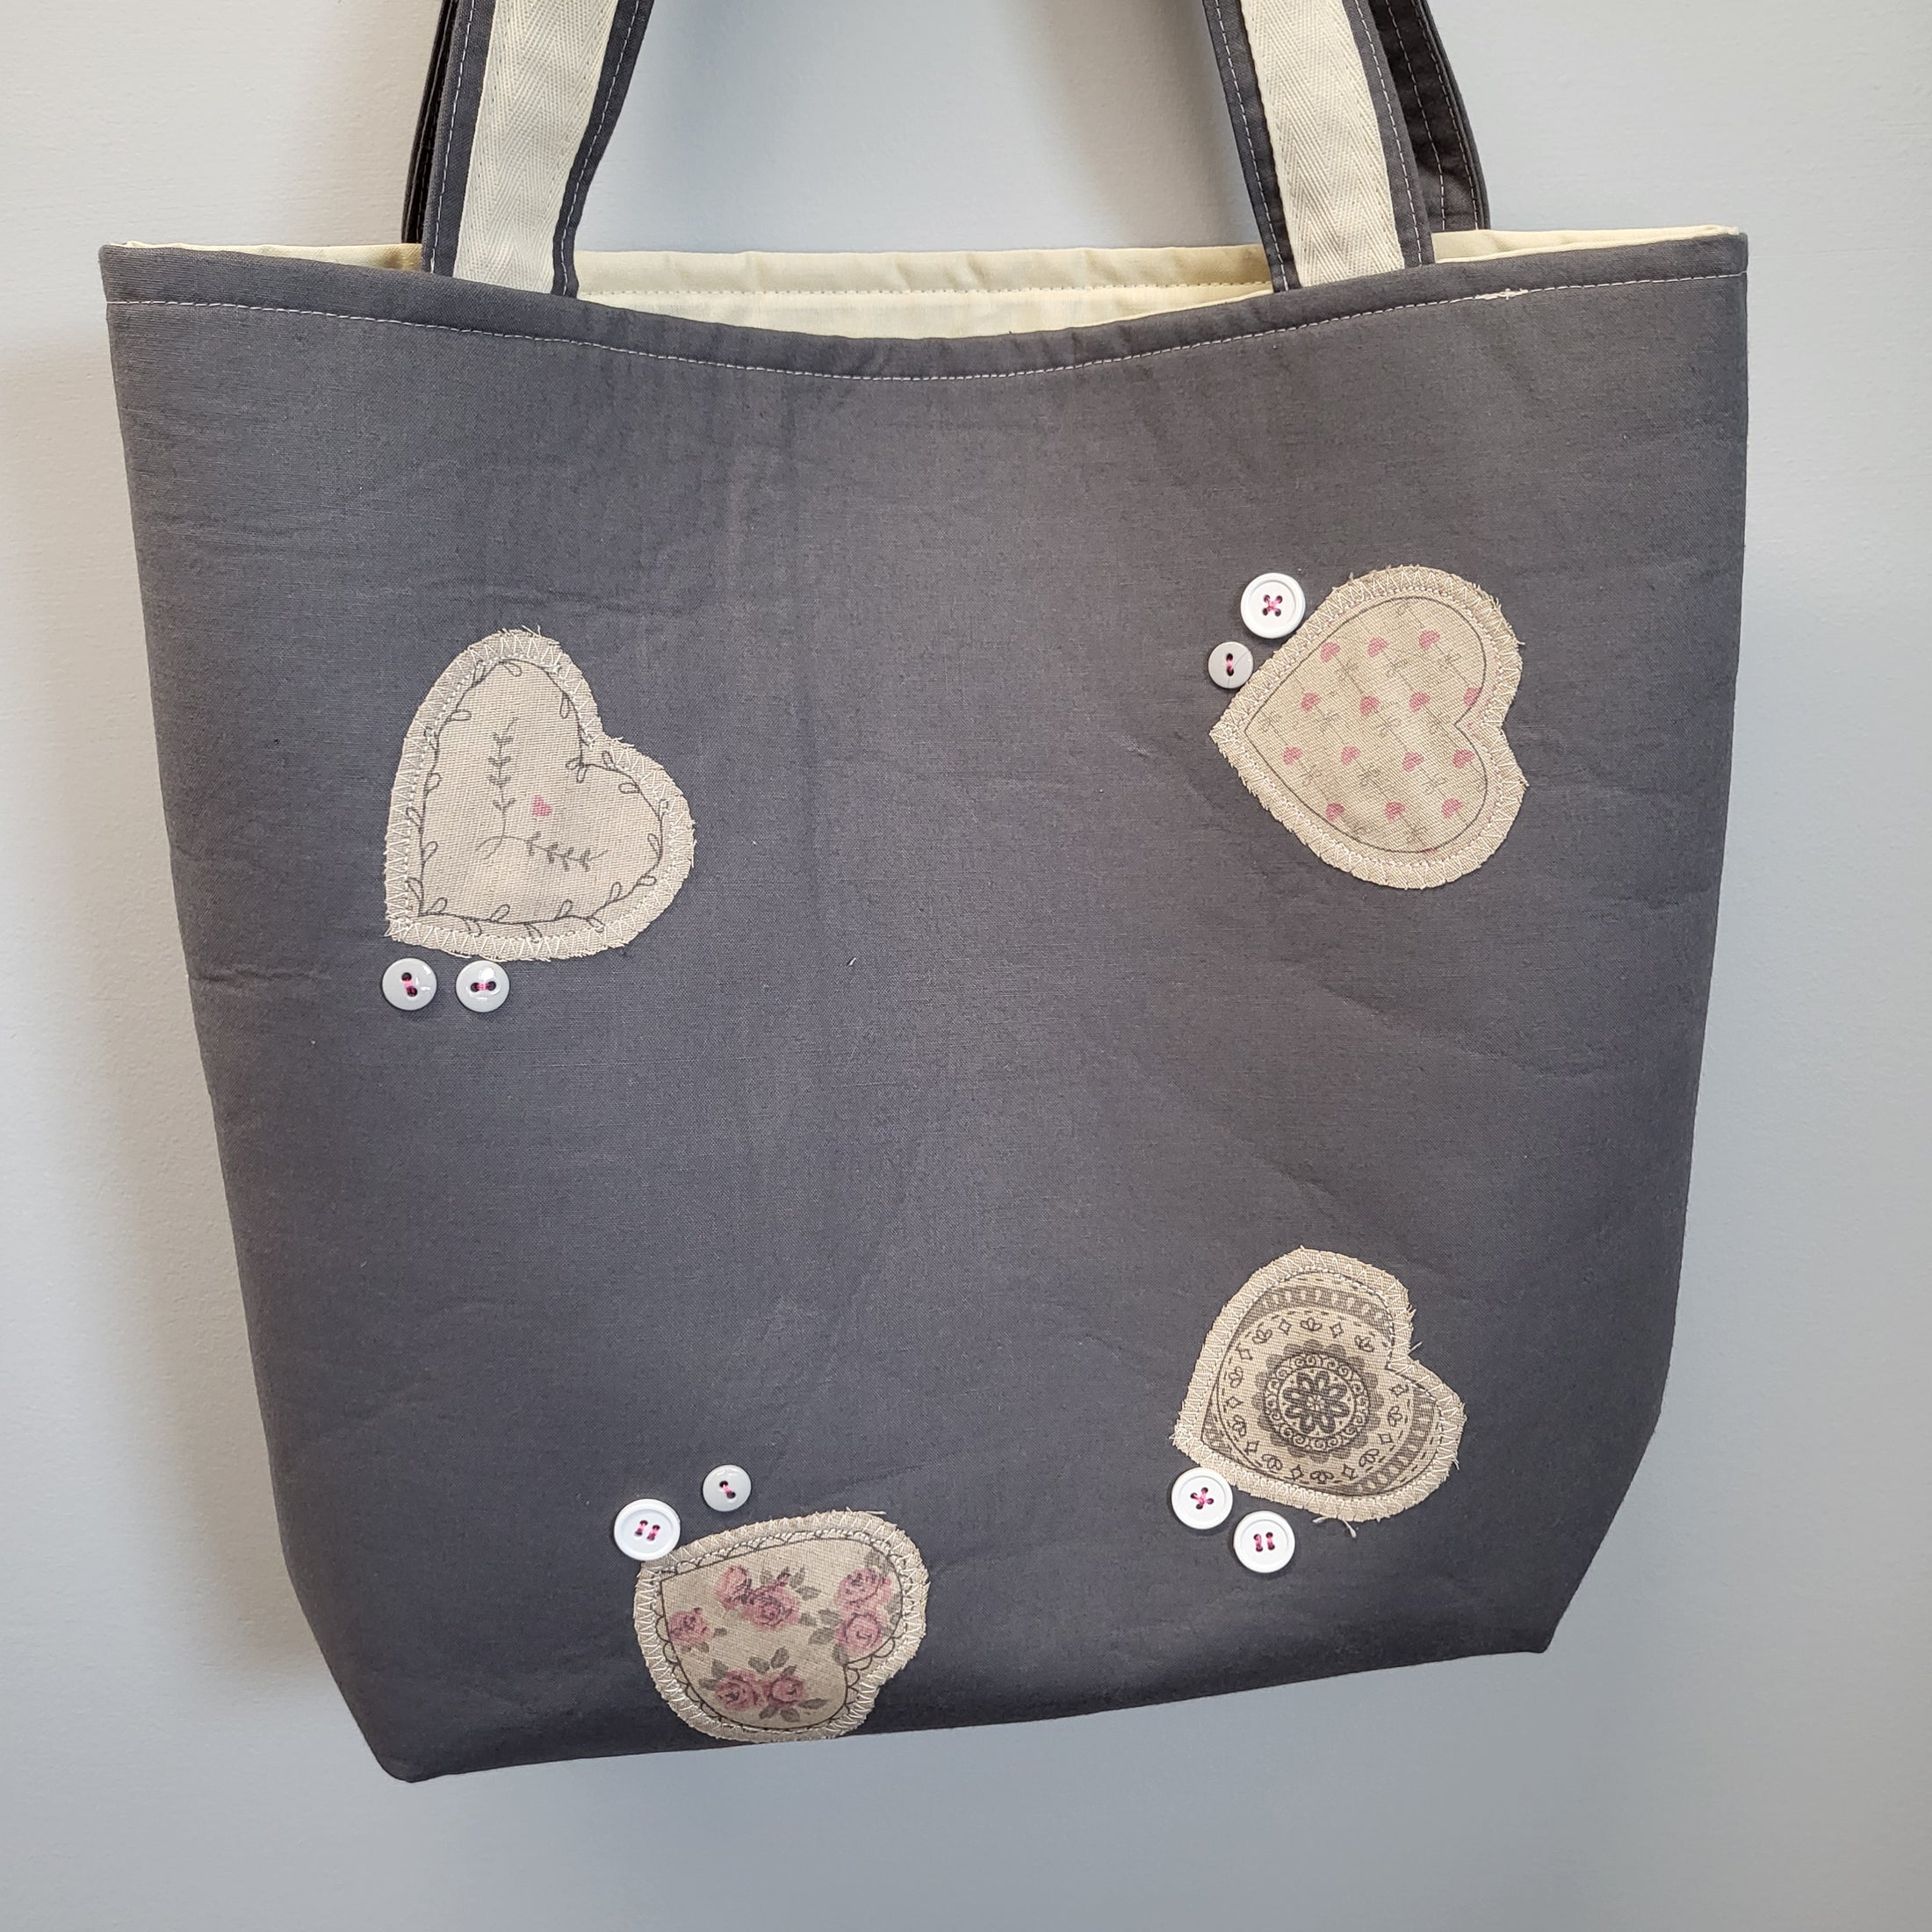 Quilted heart totes with appliqued hearts and handsewn buttons. 